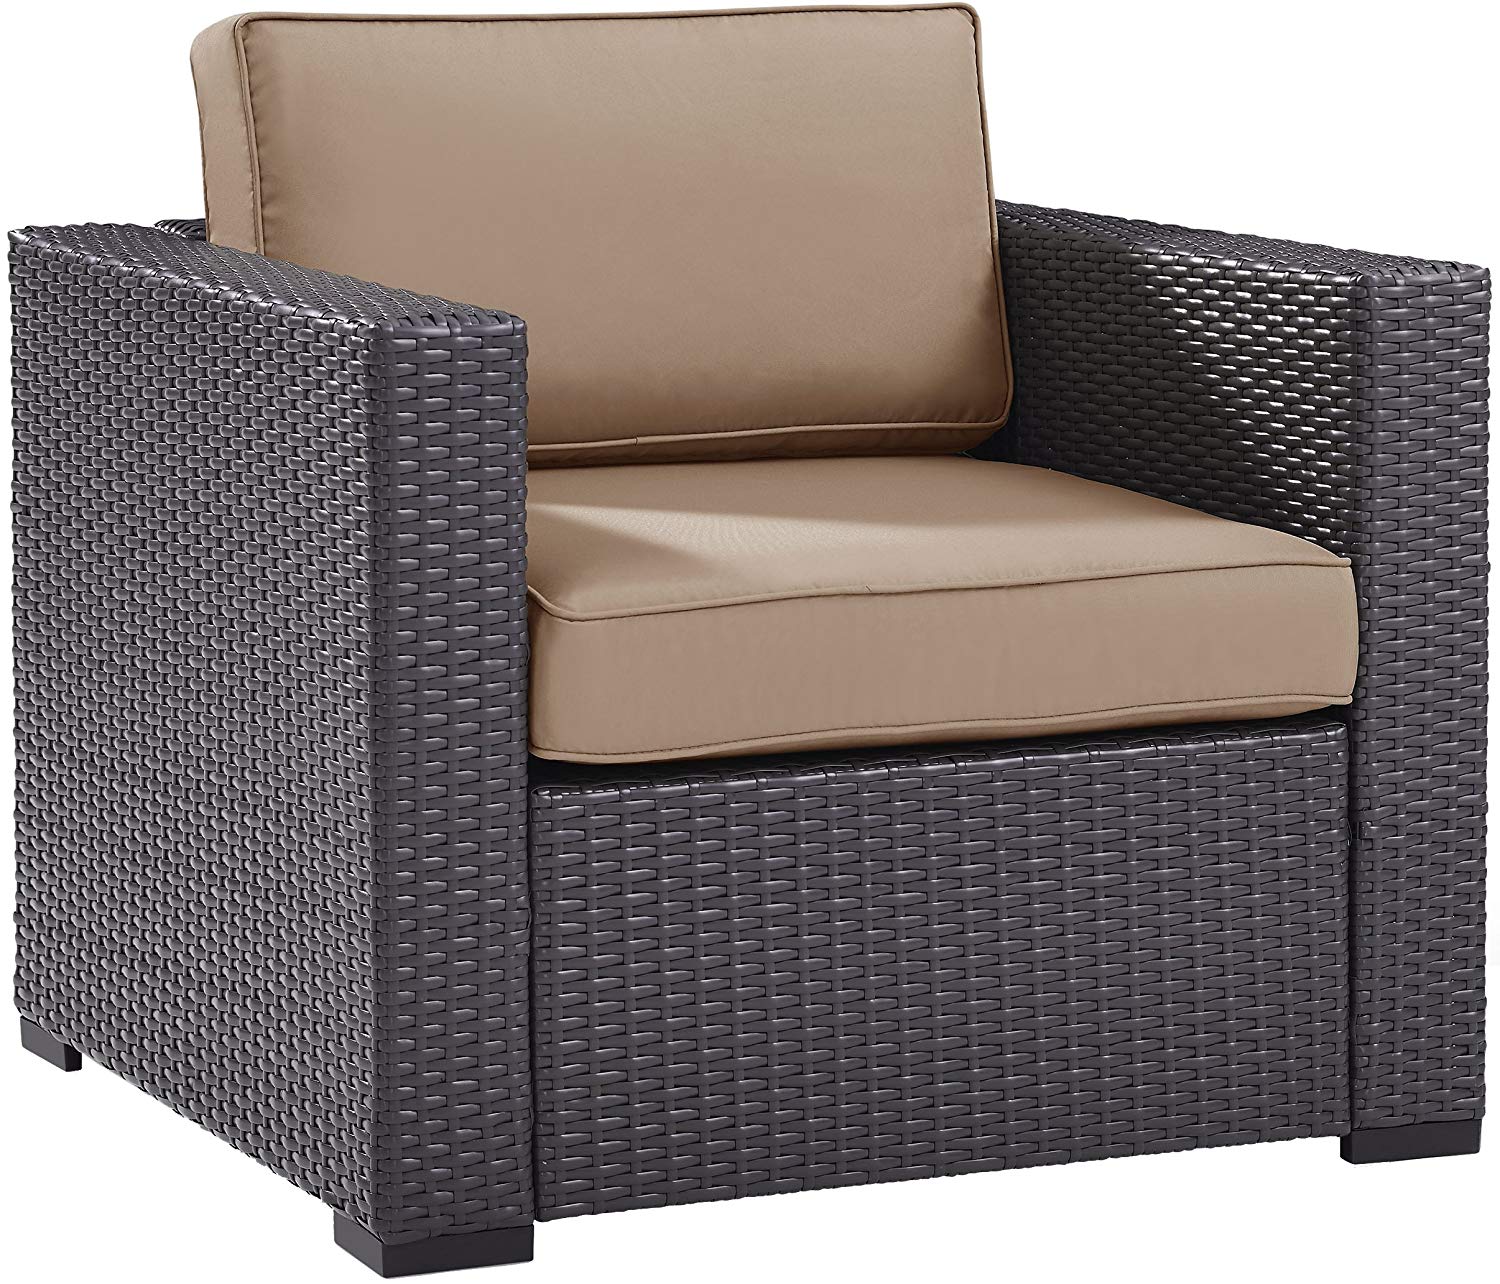 Crosley Furniture Biscayne 3 Piece Fabric Patio Conversation Set in Brown/Mocha - image 2 of 10